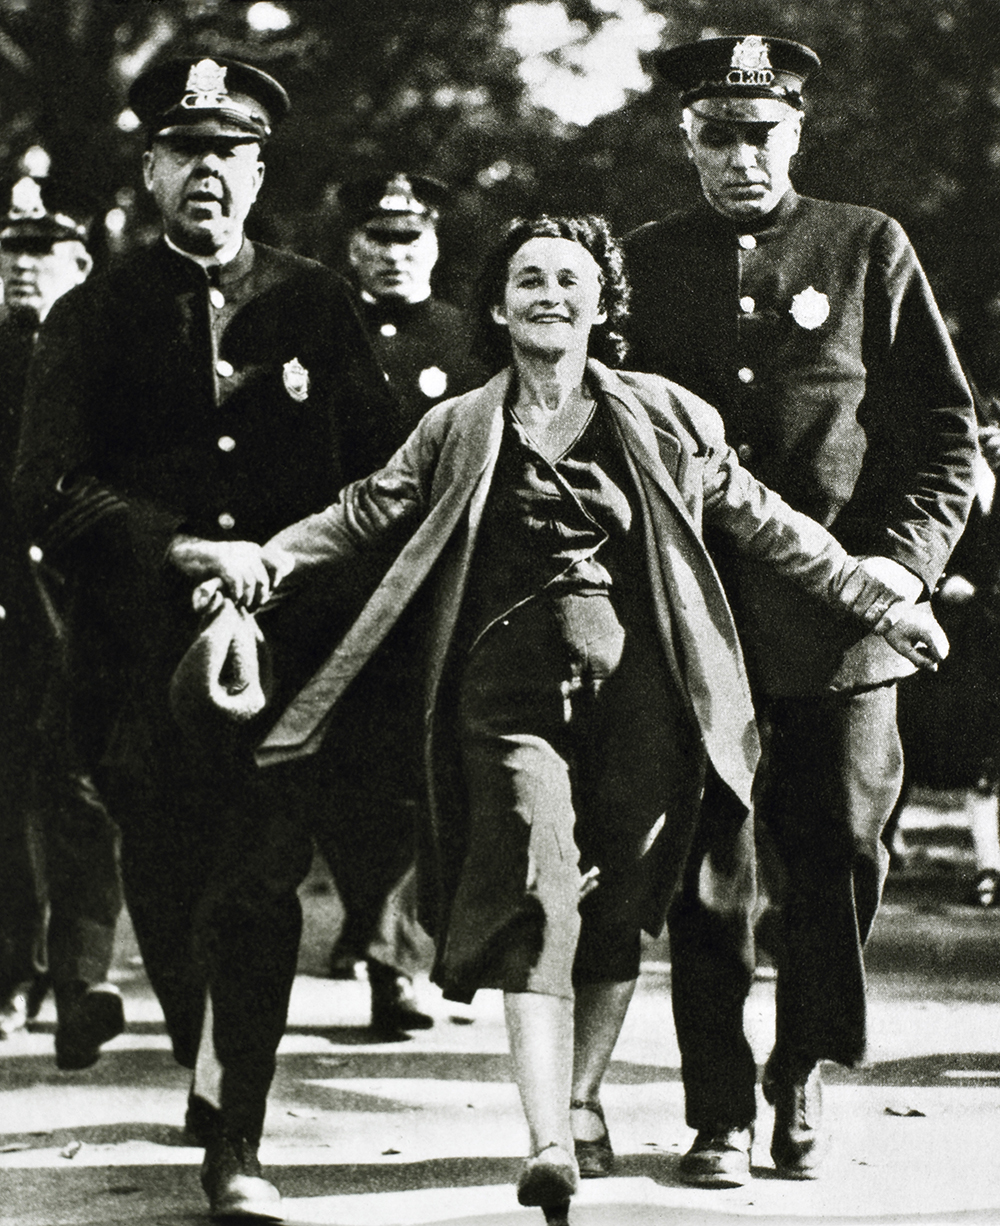 Labor organizer Edith Berkman being arrested during a textile workers’ strike, Lawrence, Massachusetts, 1933.